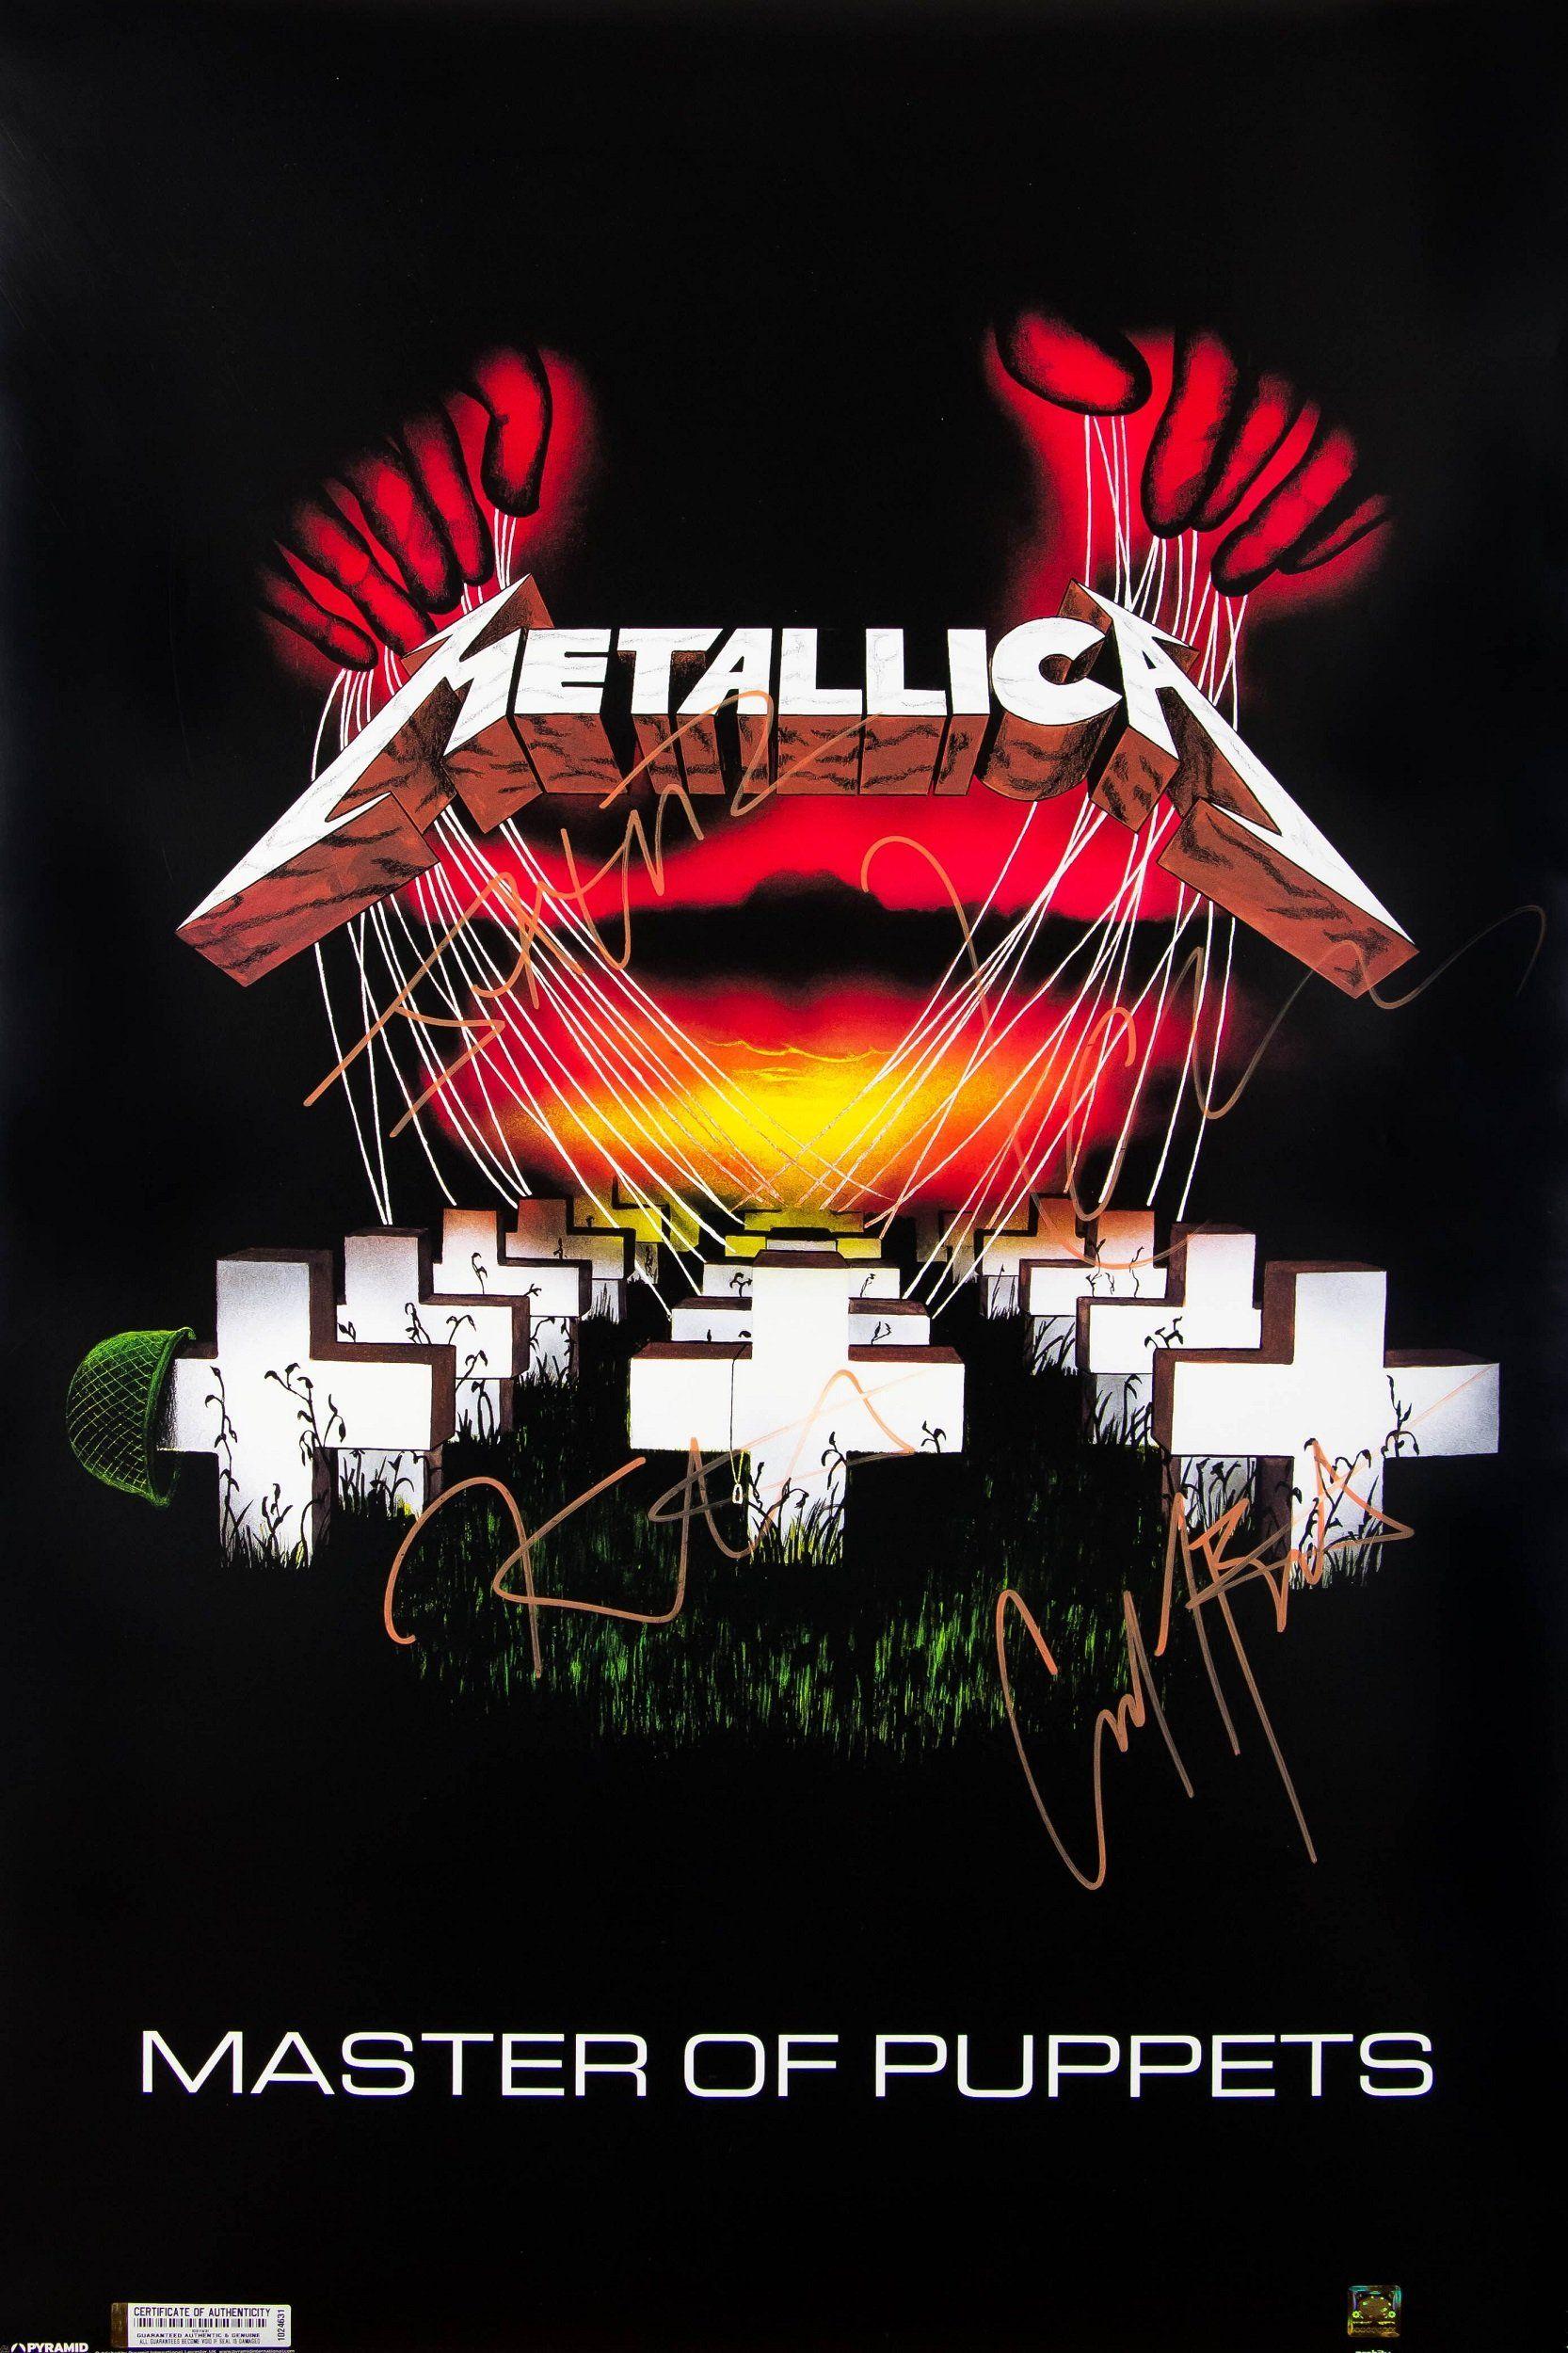 Metallica Master of Puppets Signed Poster. metallica in 2019